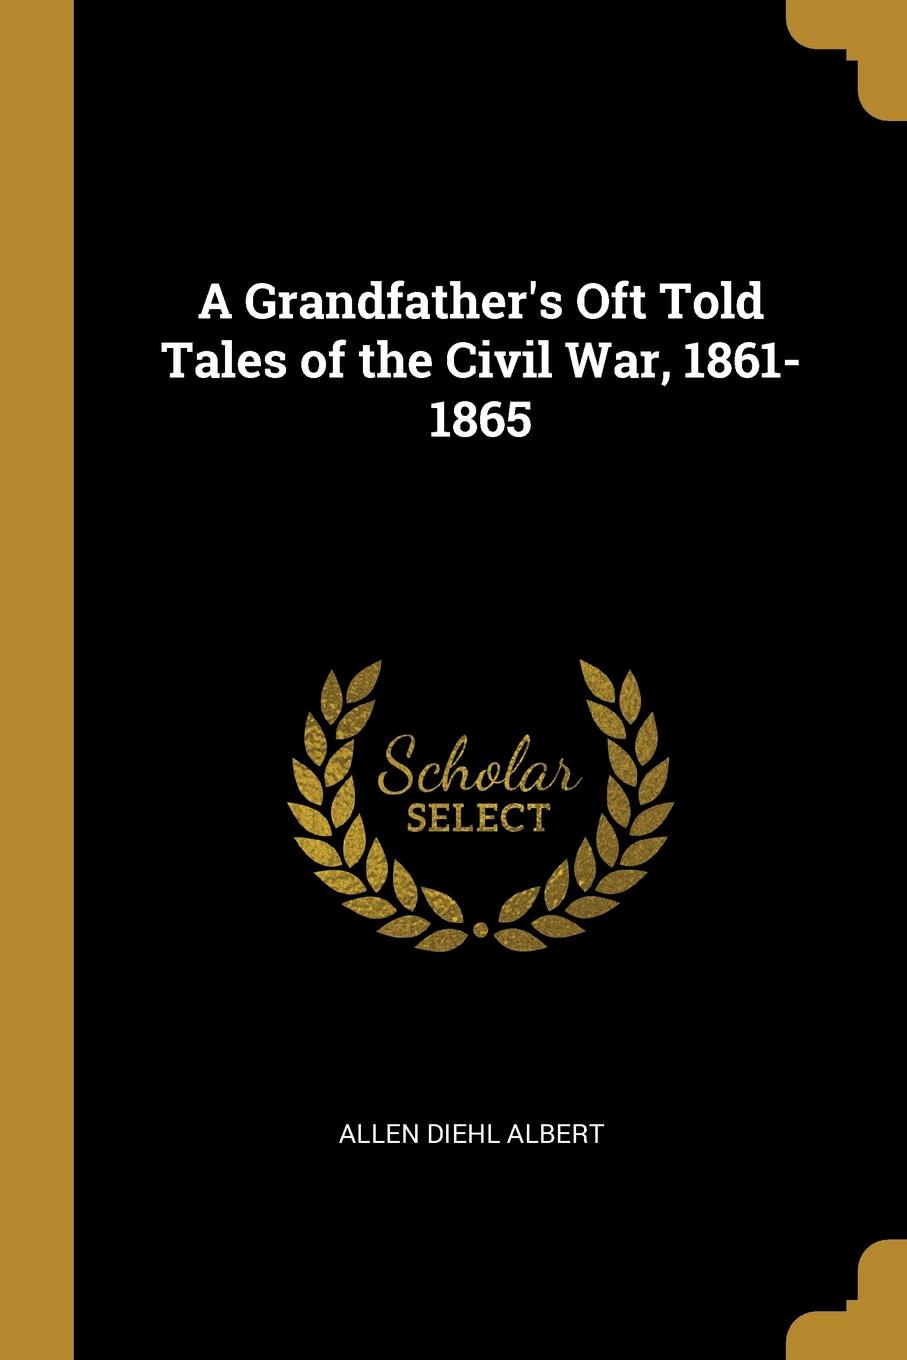 A Grandfather.s Oft Told Tales of the Civil War, 1861-1865